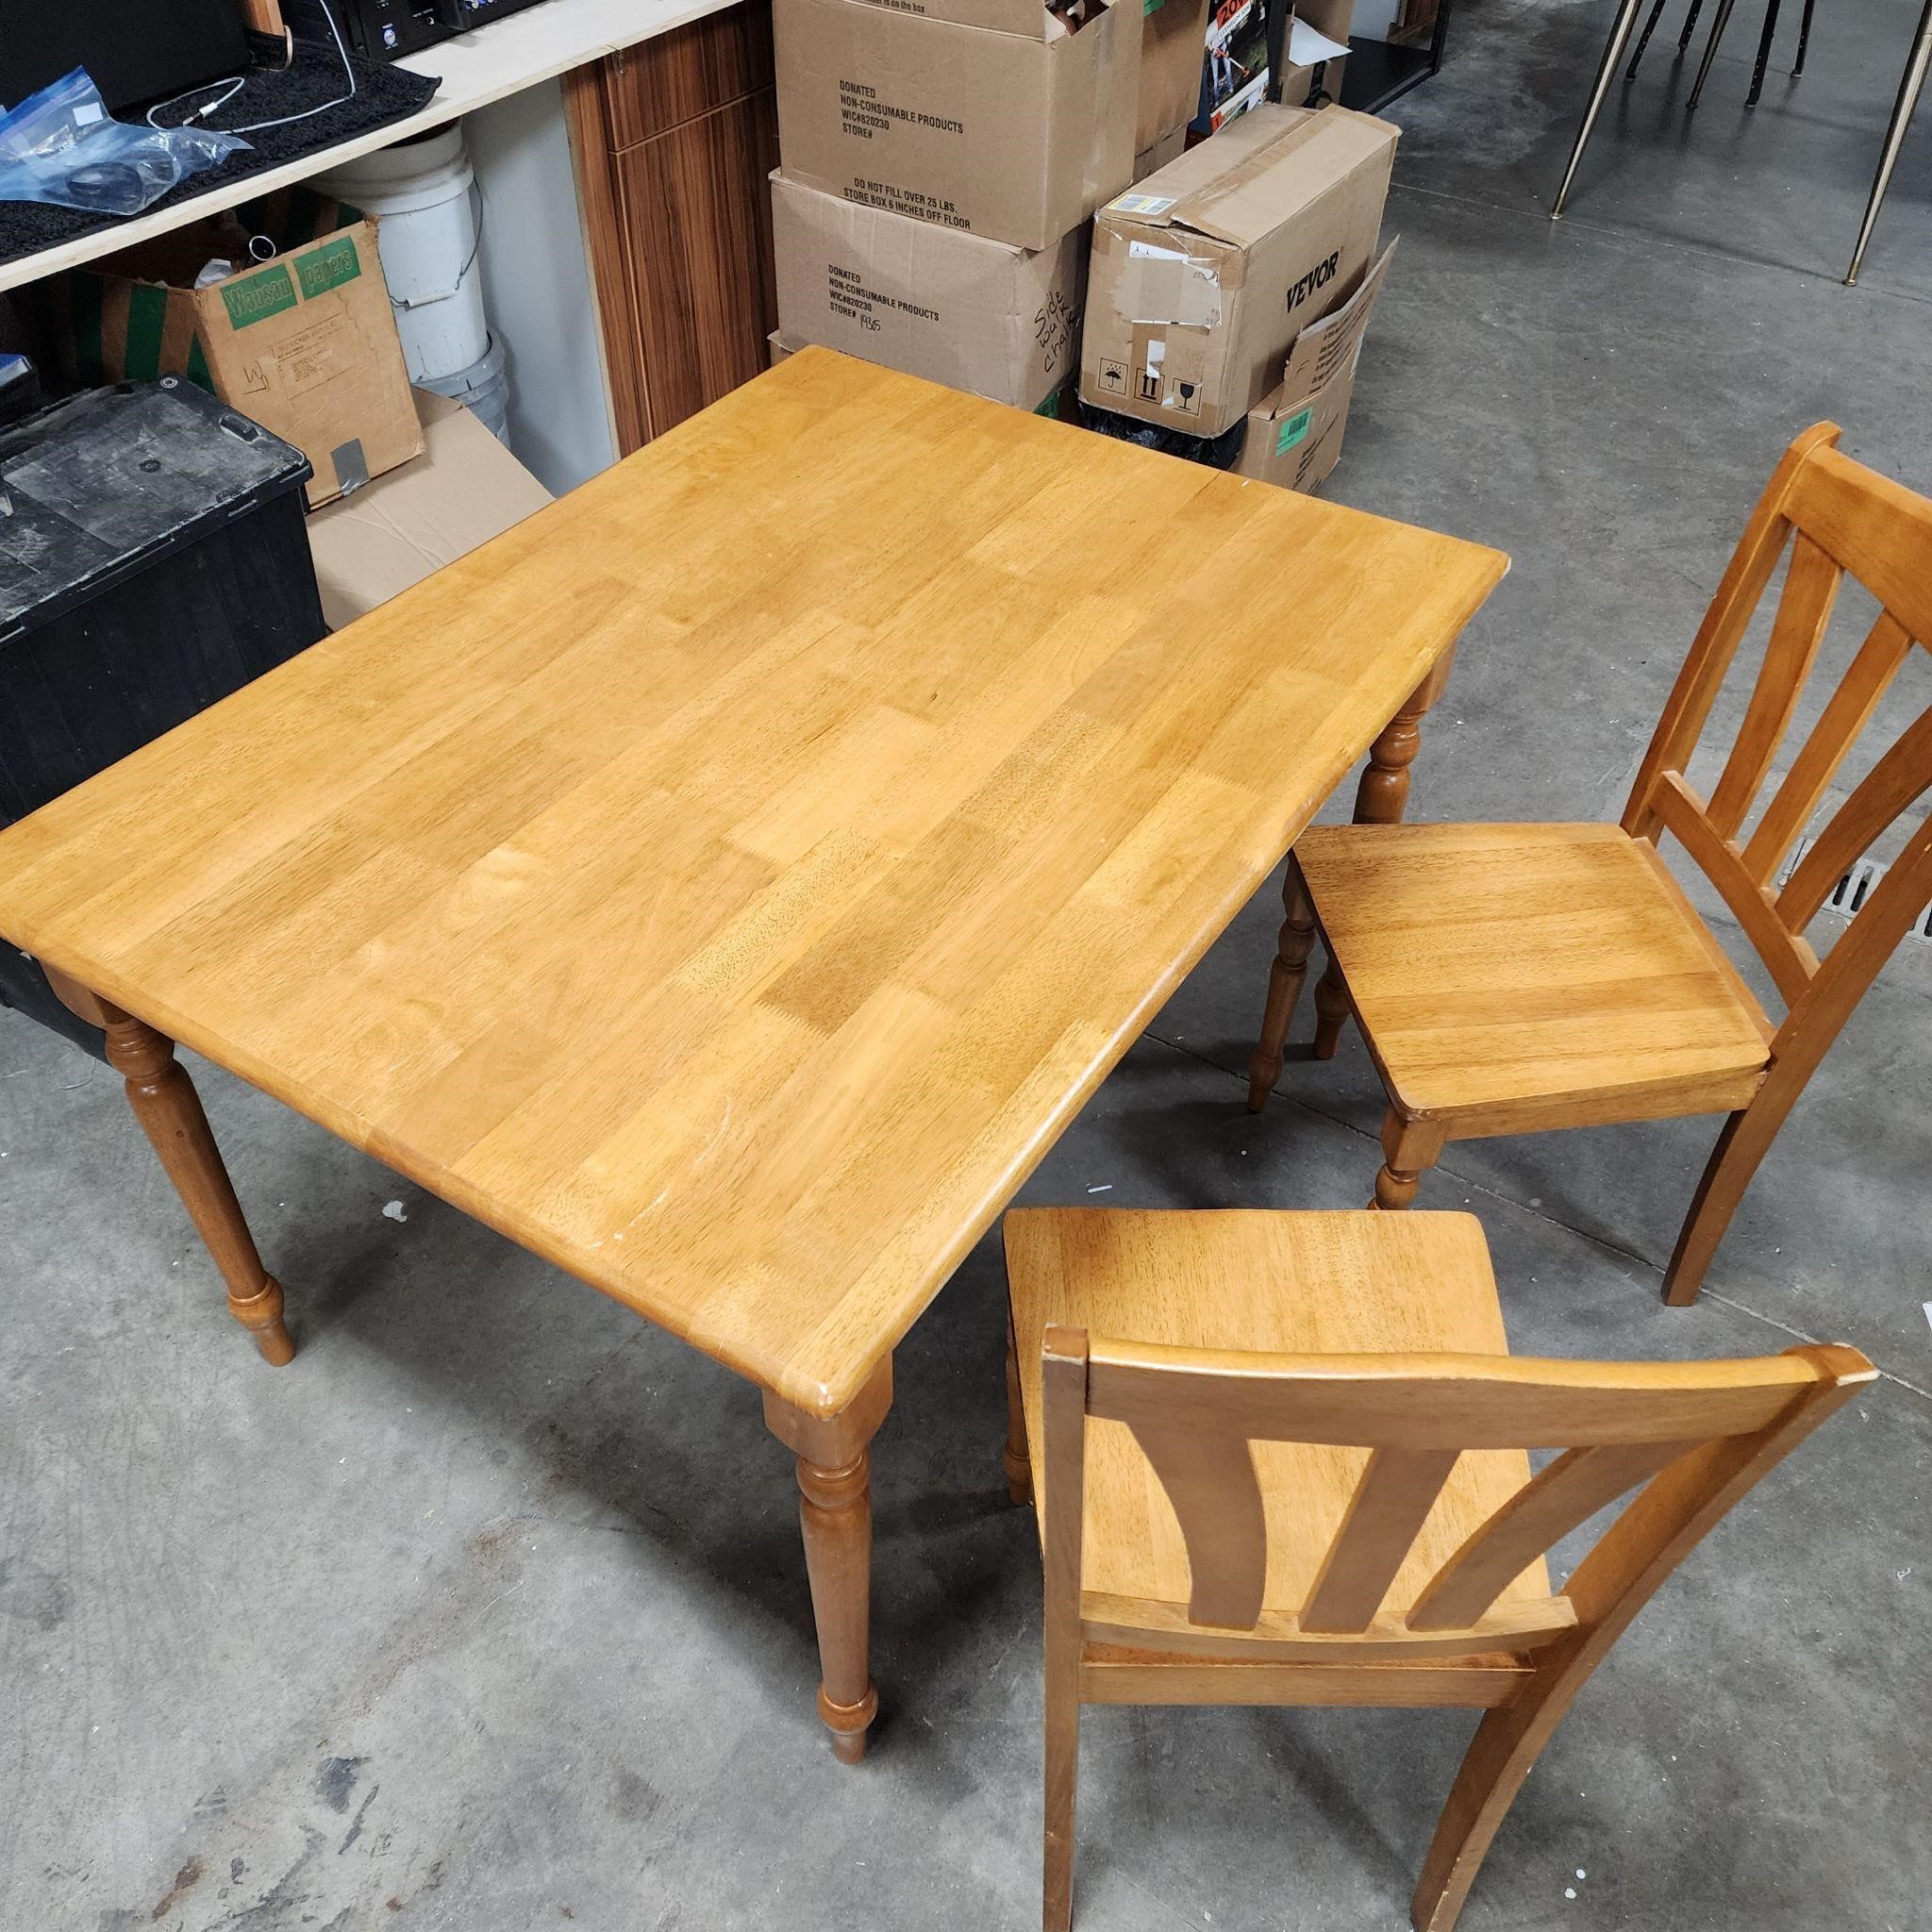 4' x 3' Oak Table w/ couple chairs